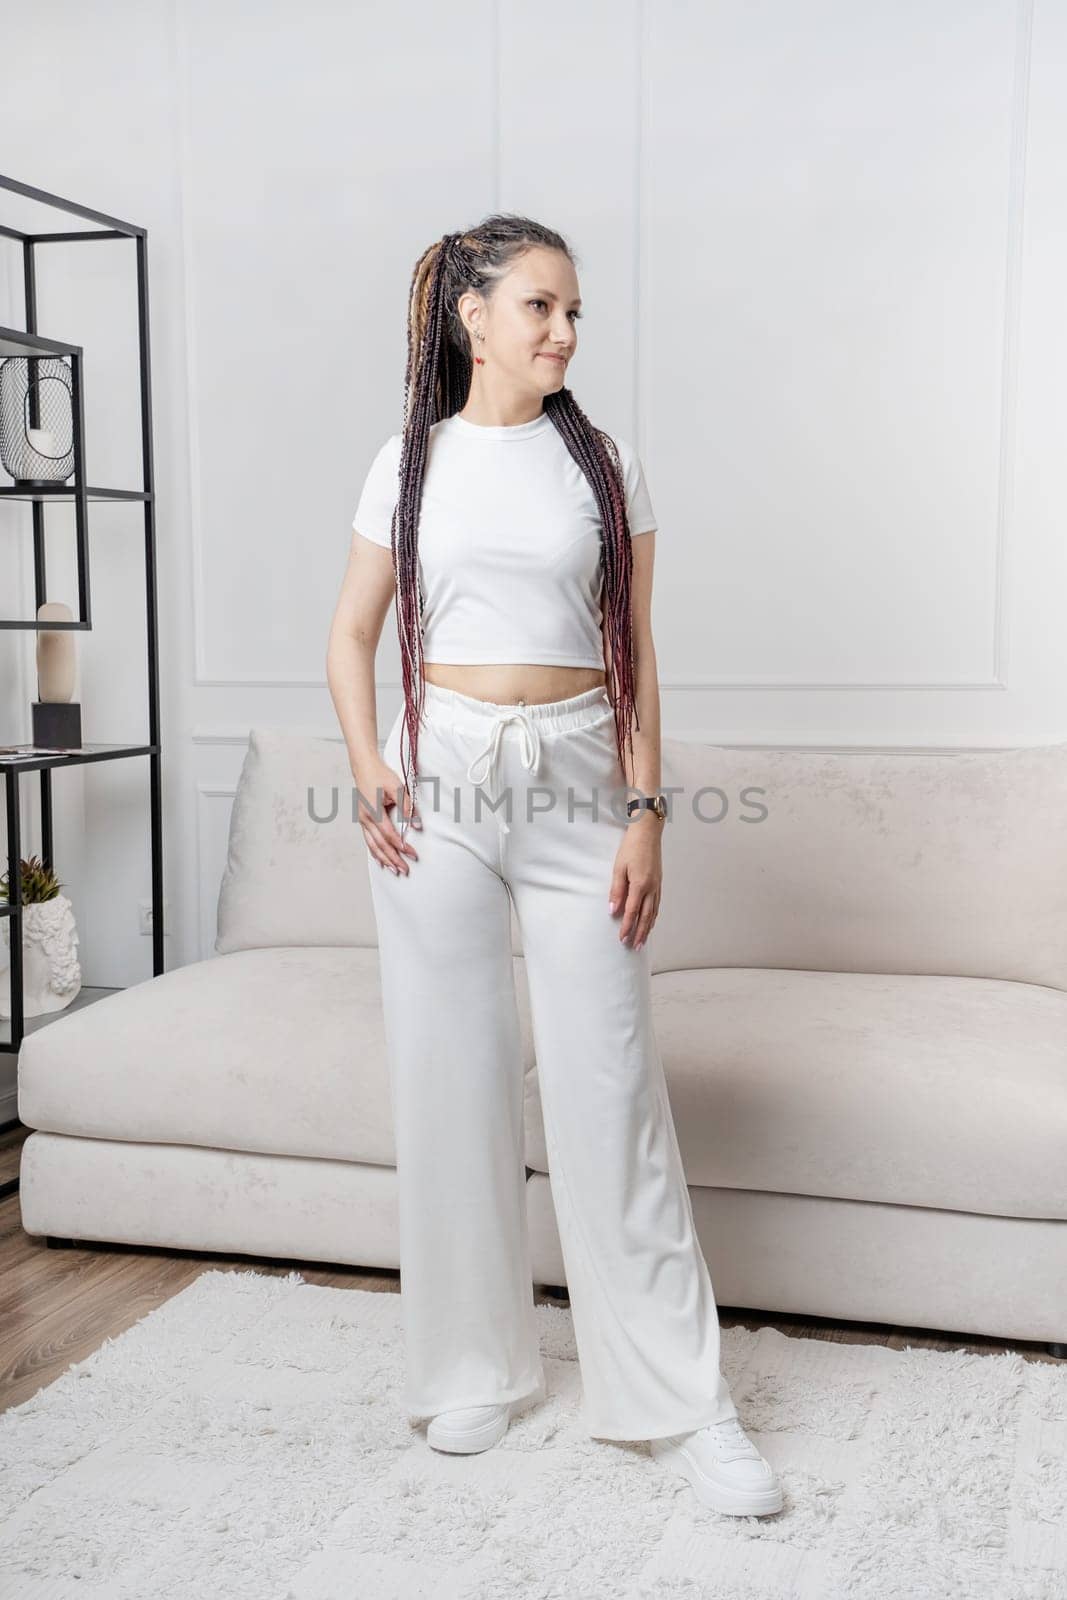 Fashionable young beautiful woman with dreadlocks posing in interior by Desperada